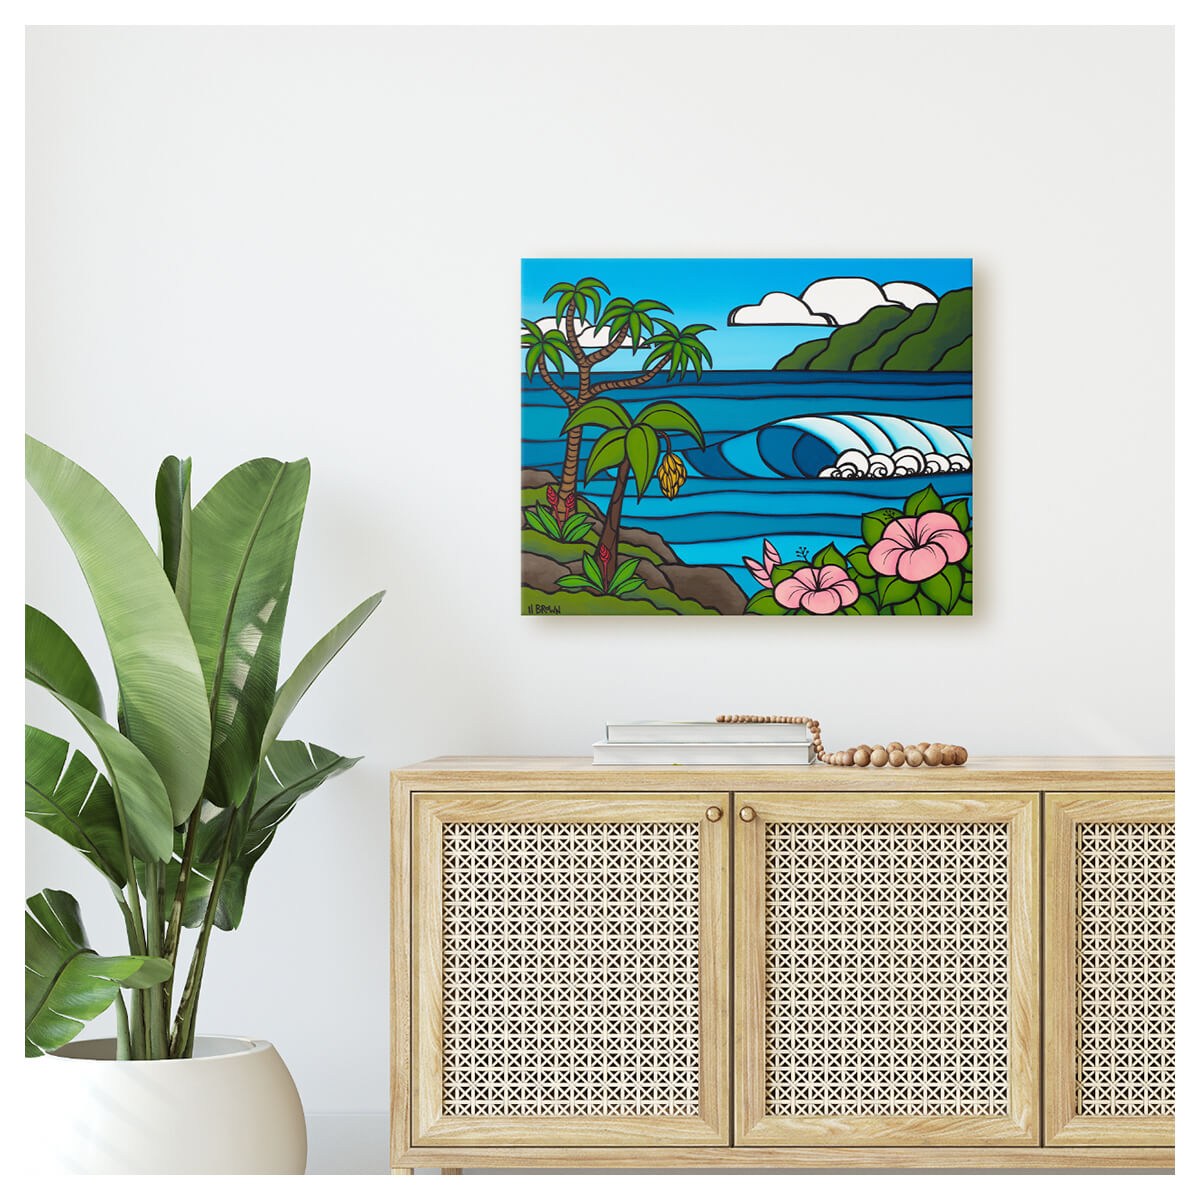 Colorful canvas artwork in Coastal Modern home by Kauai artist Heather Brown featuring a serene Hawaii seascape with a cresting wave, framed by pink hibiscus flowers and a banana tree with green mountains in the distance.